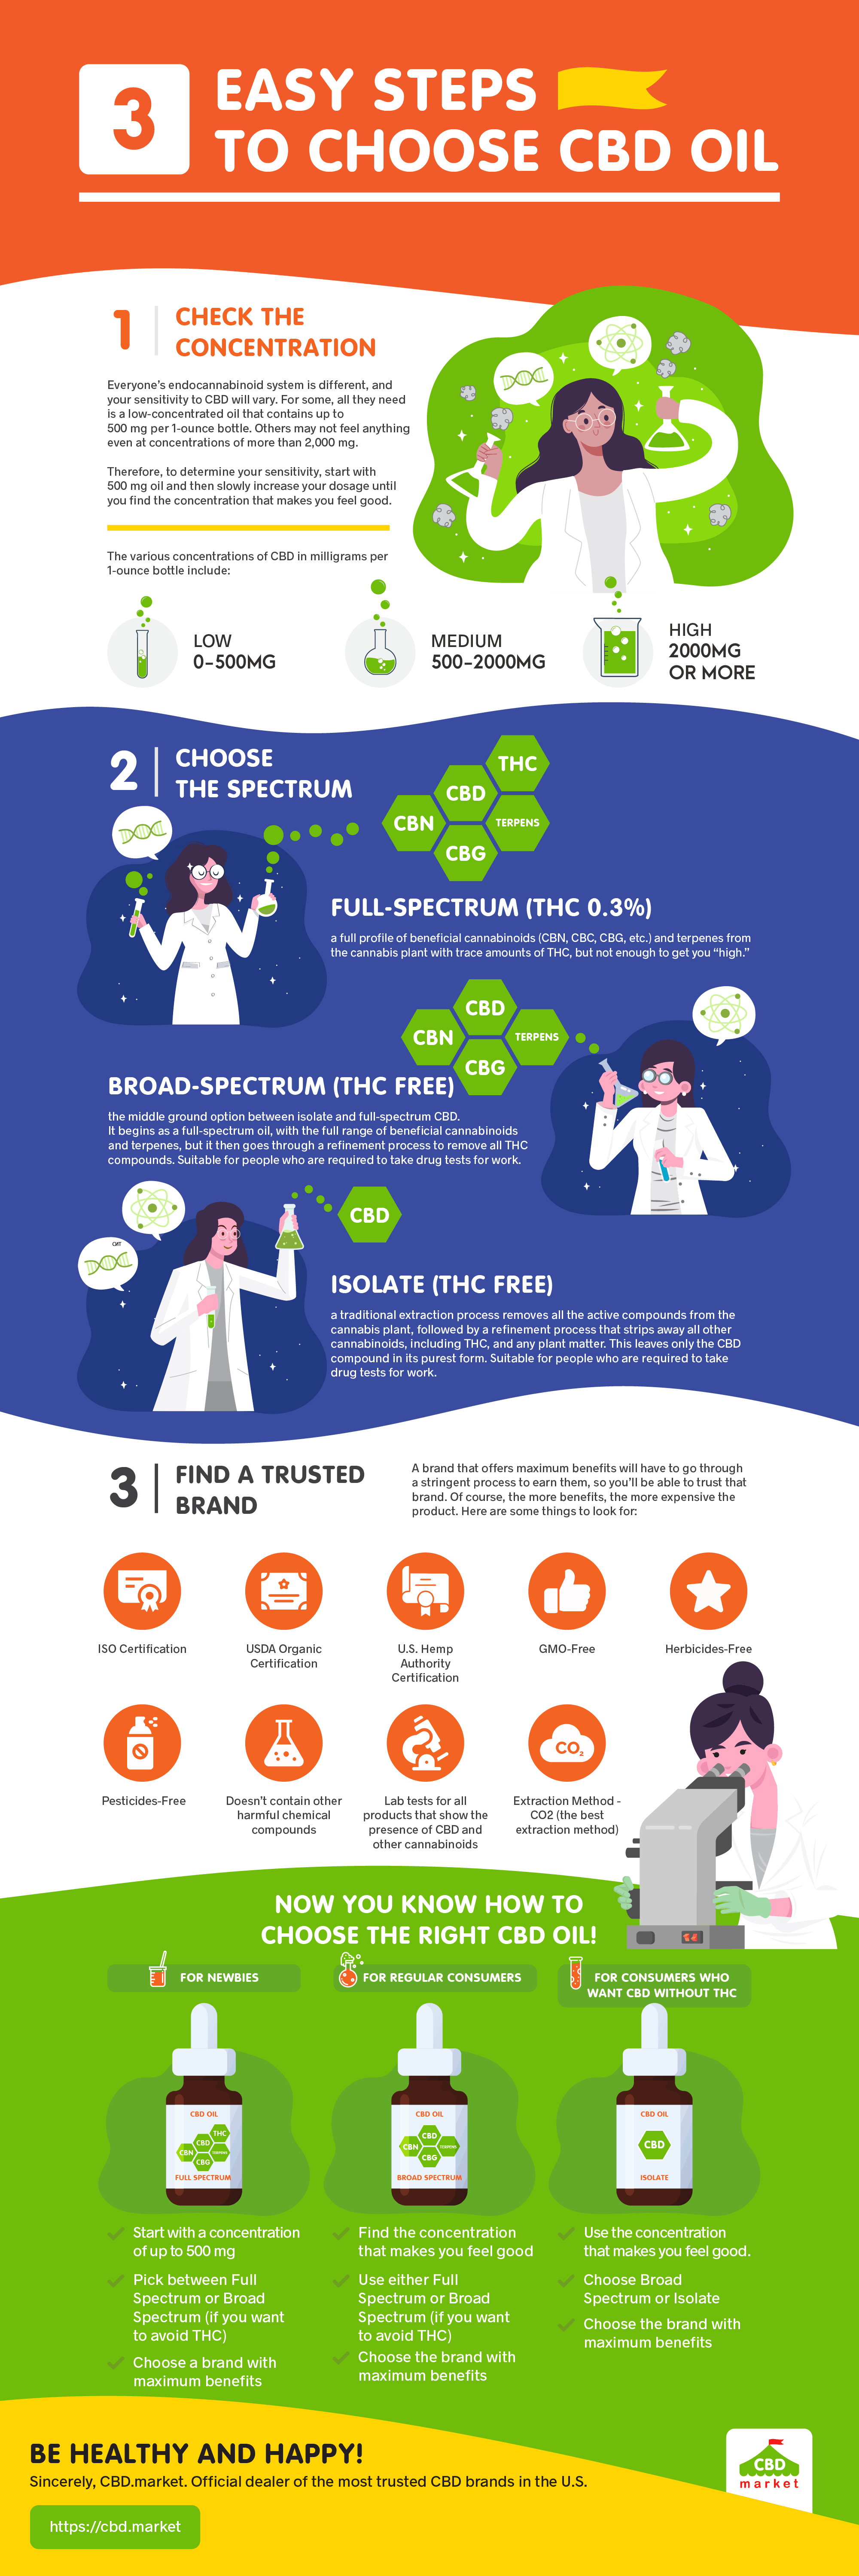 3 Easy Steps To Choose CBD Oil (Infographic)